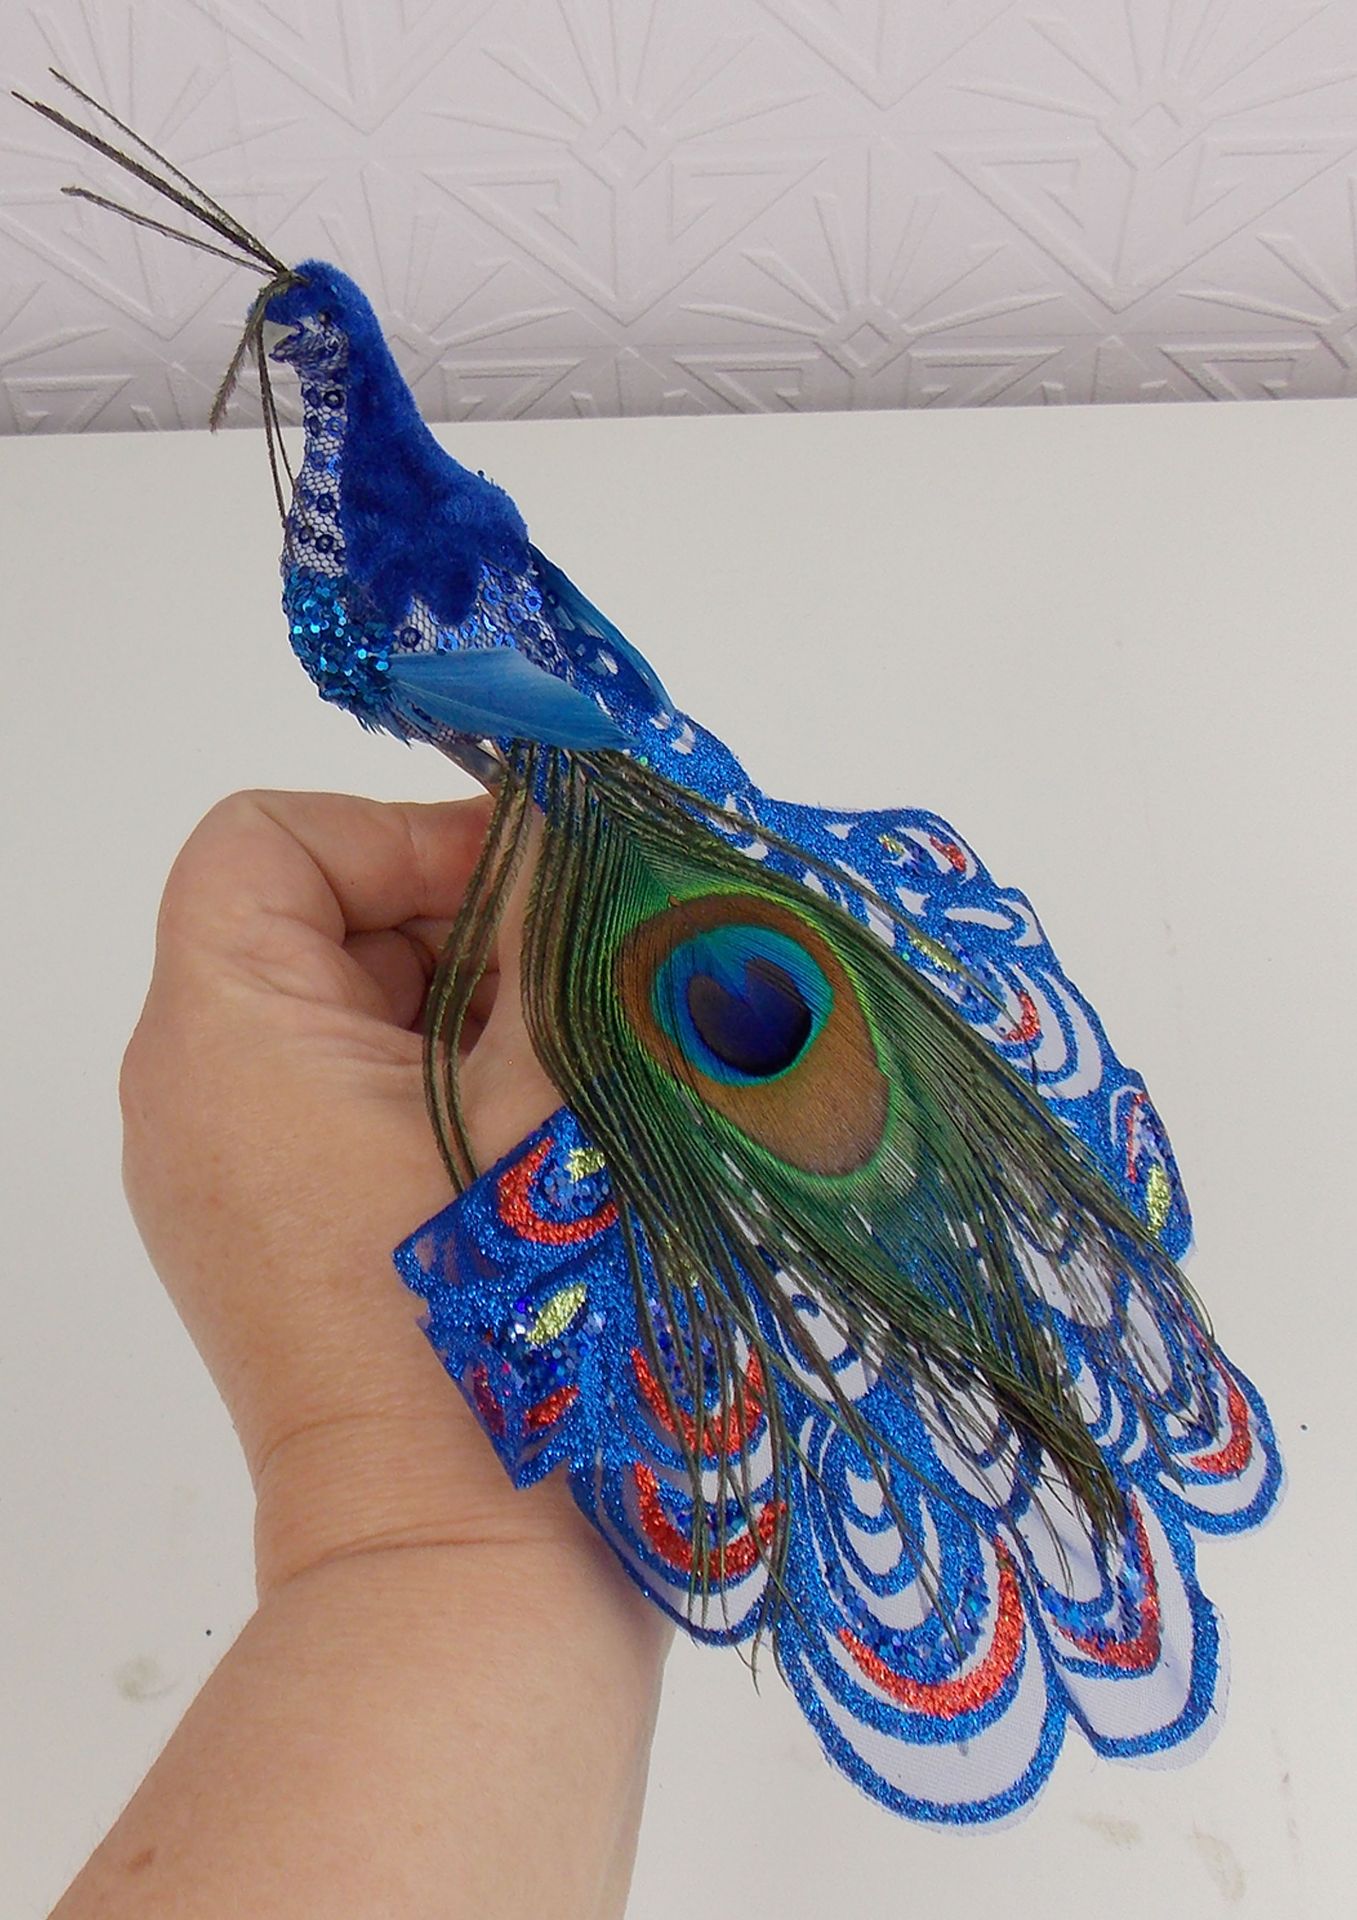 6 x Clip-On Peacock Ornaments - Image 5 of 6